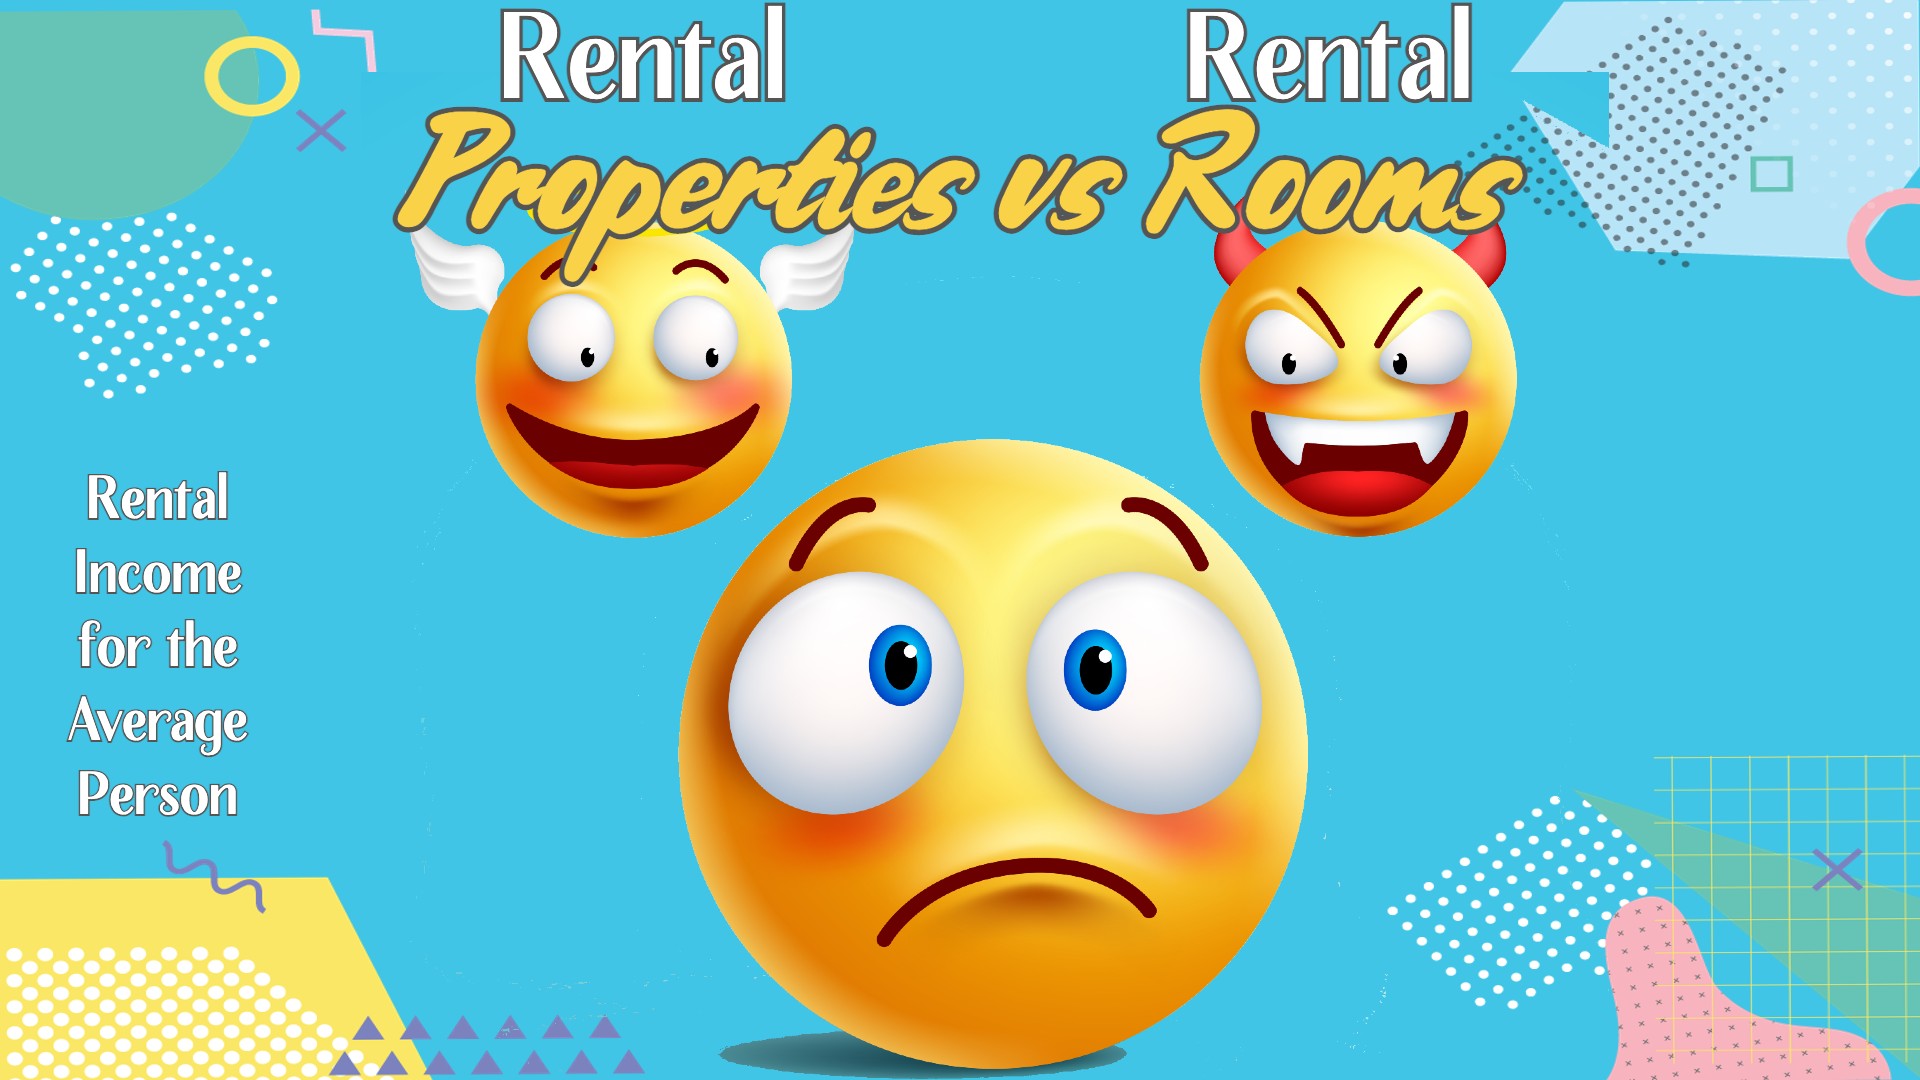 Rental Properties vs. Rental Rooms: Rental Income for the Average Person